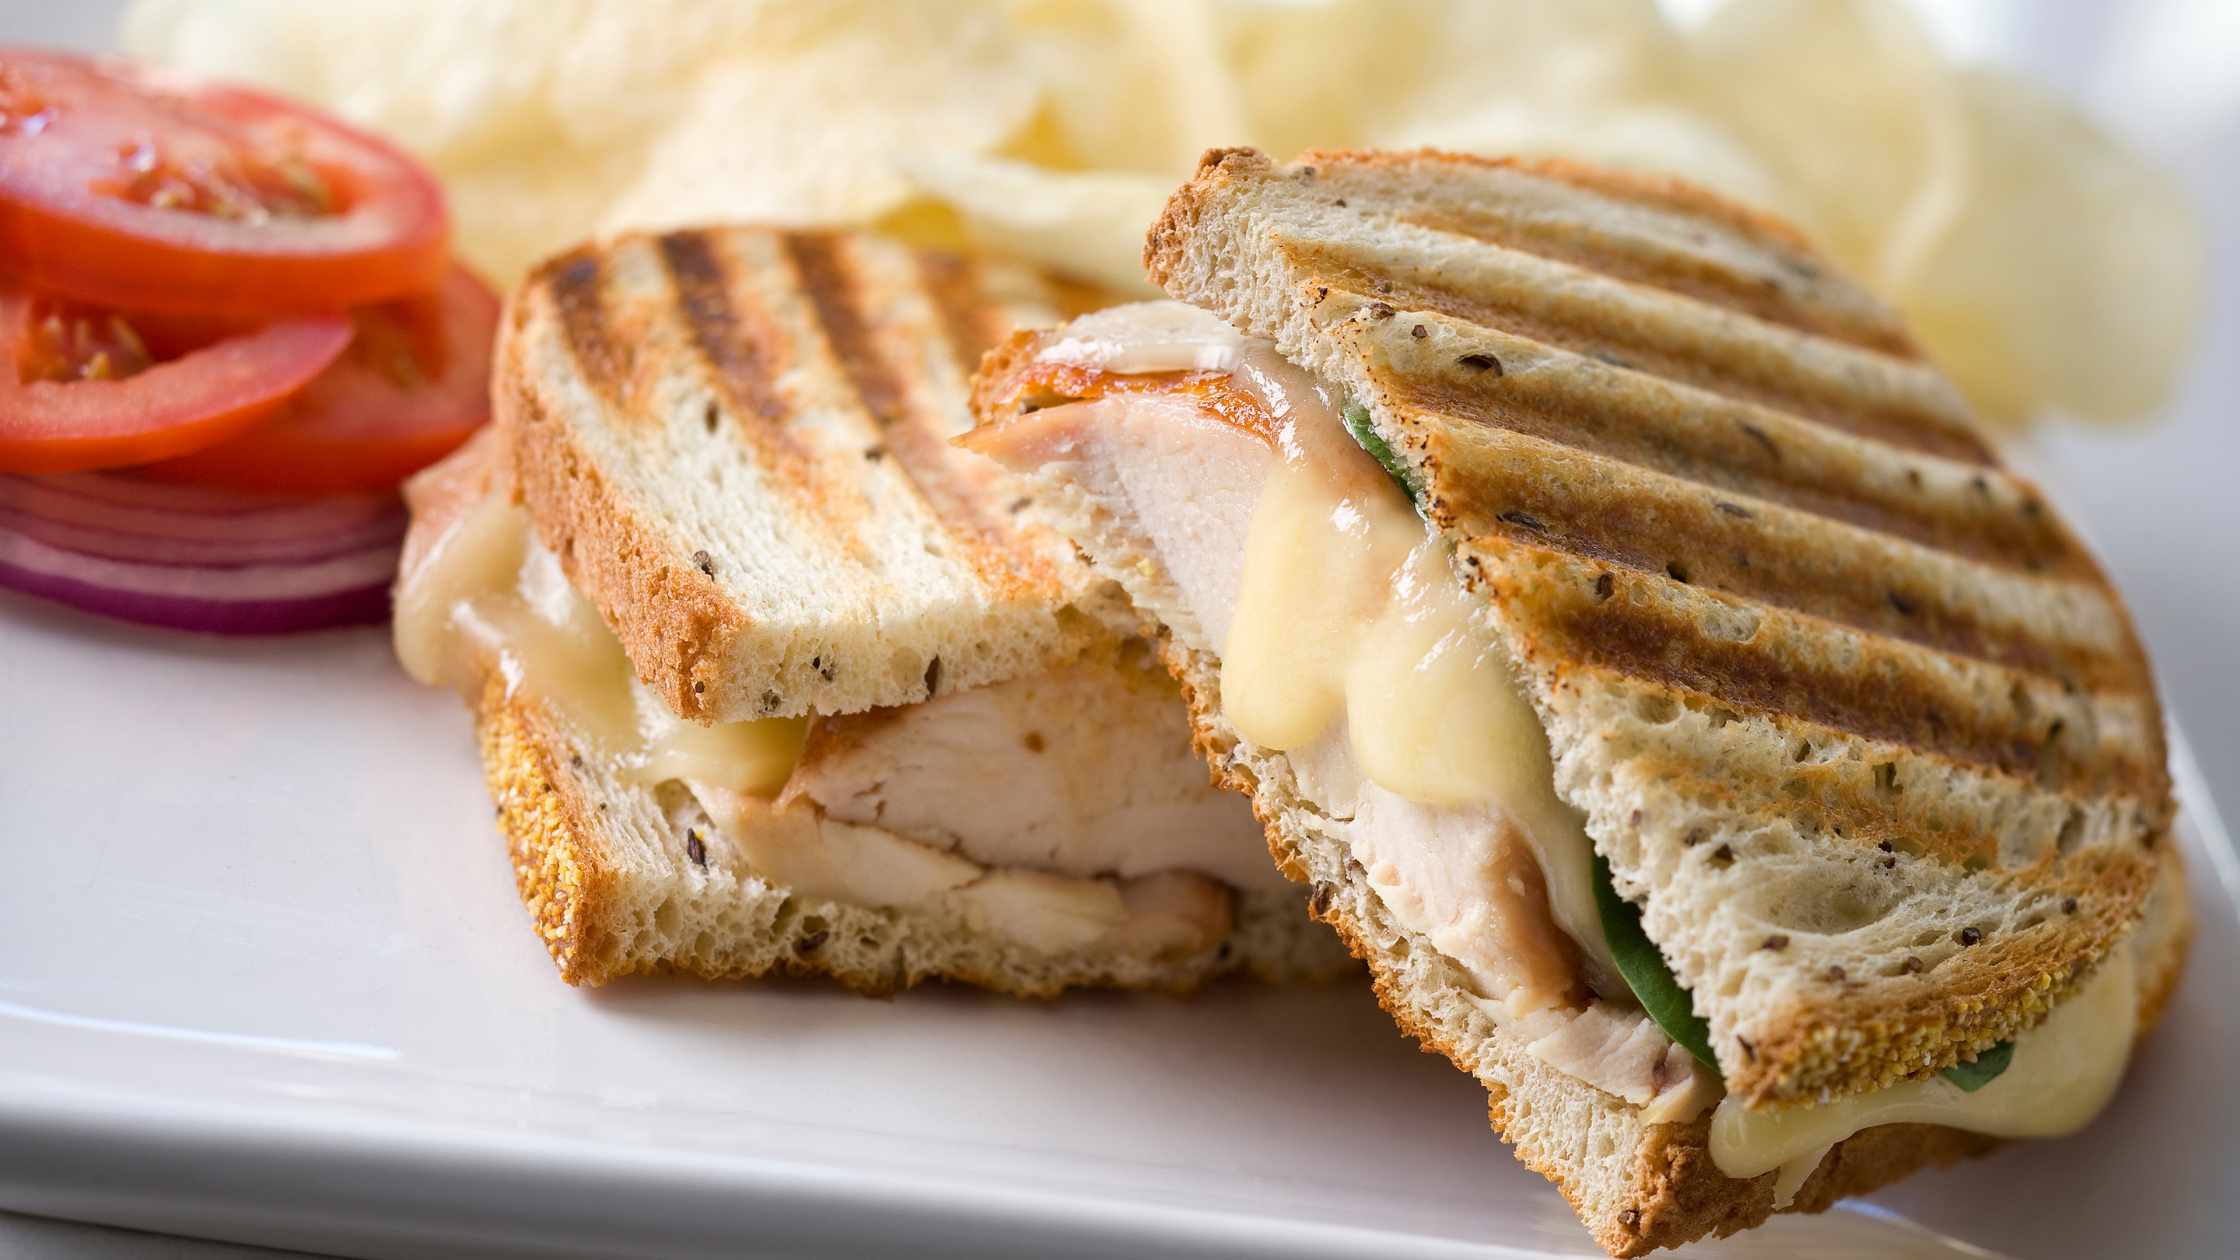 Grilled Chicken & Brie Panini